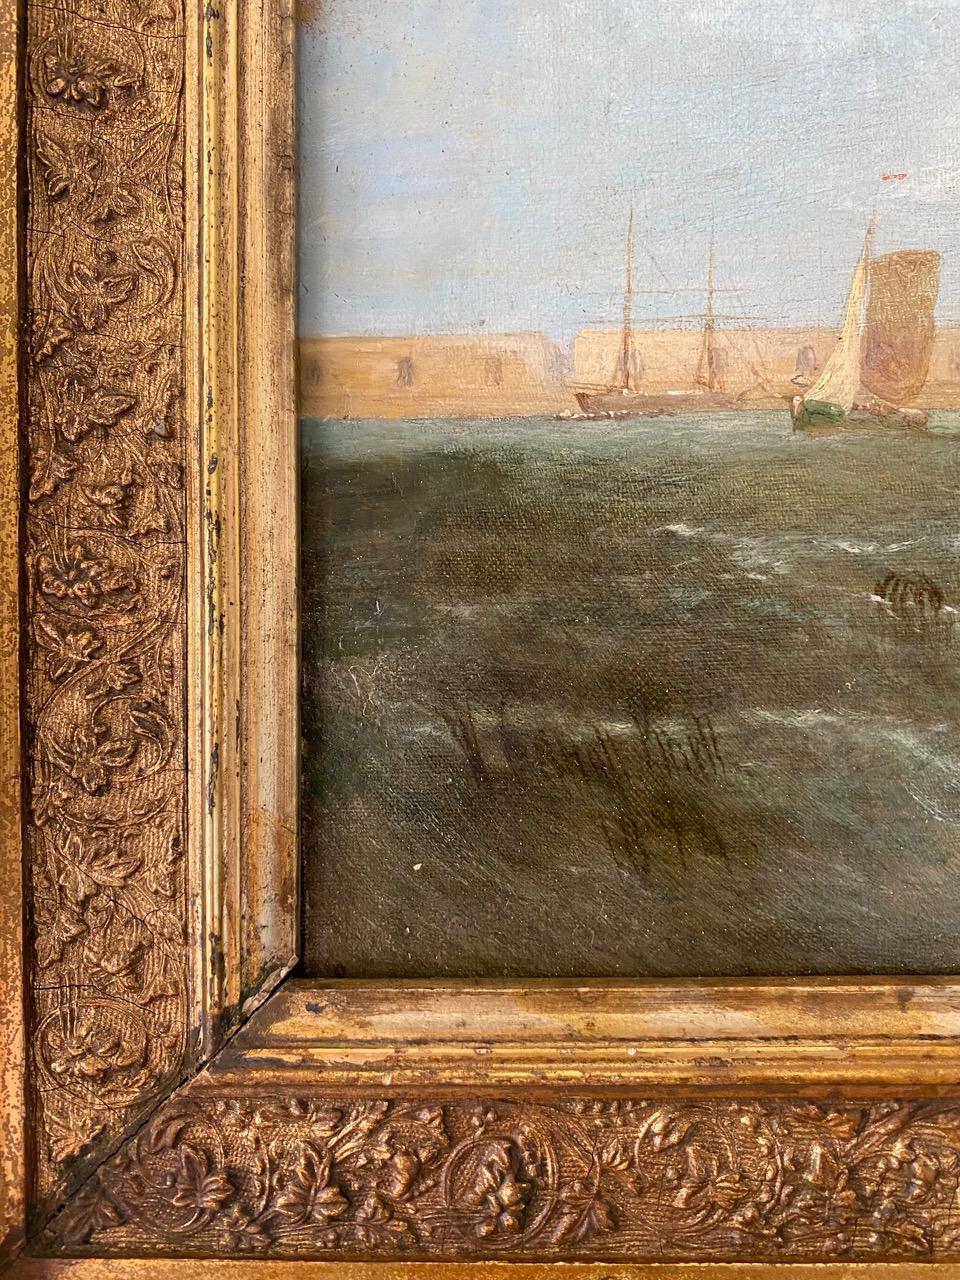 William Calcott Knell (1830 - 1880)
Extensive view of Portsmouth Harbour with vessels under sail
Signed and dated '1874' bottom left
Oil on canvas
23½ x 11½ inches
29 x  17¼ inches with the frame

William Calcott Knell was a celebrated maritime